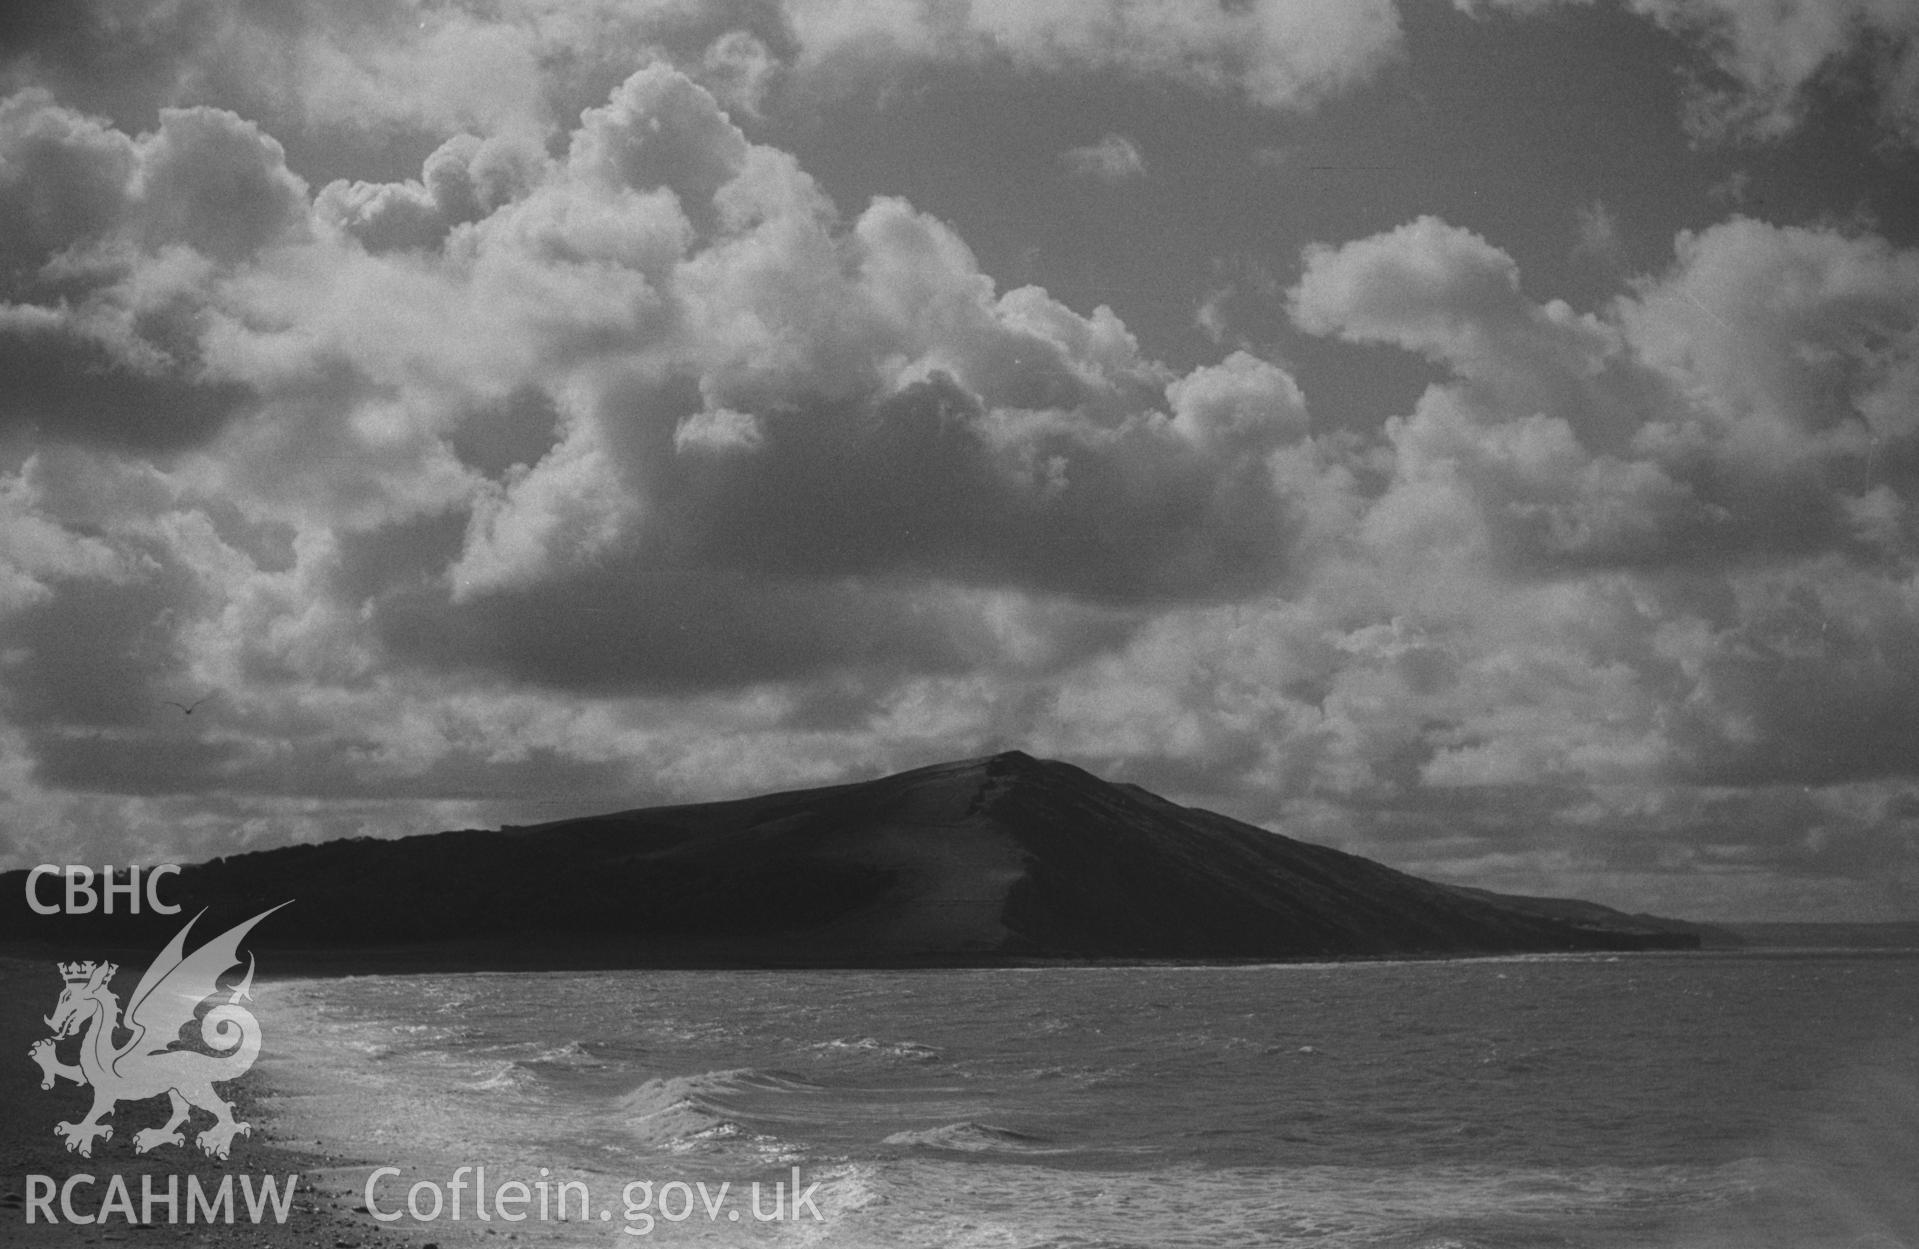 Digital copy of a black and white negative showing view of Alltwen hill from the stone pier at Tanybwlch beach, Aberystwyth. Photographed by Arthur O. Chater in September 1964 from Grid Reference SN 5791 8071, looking south south west.